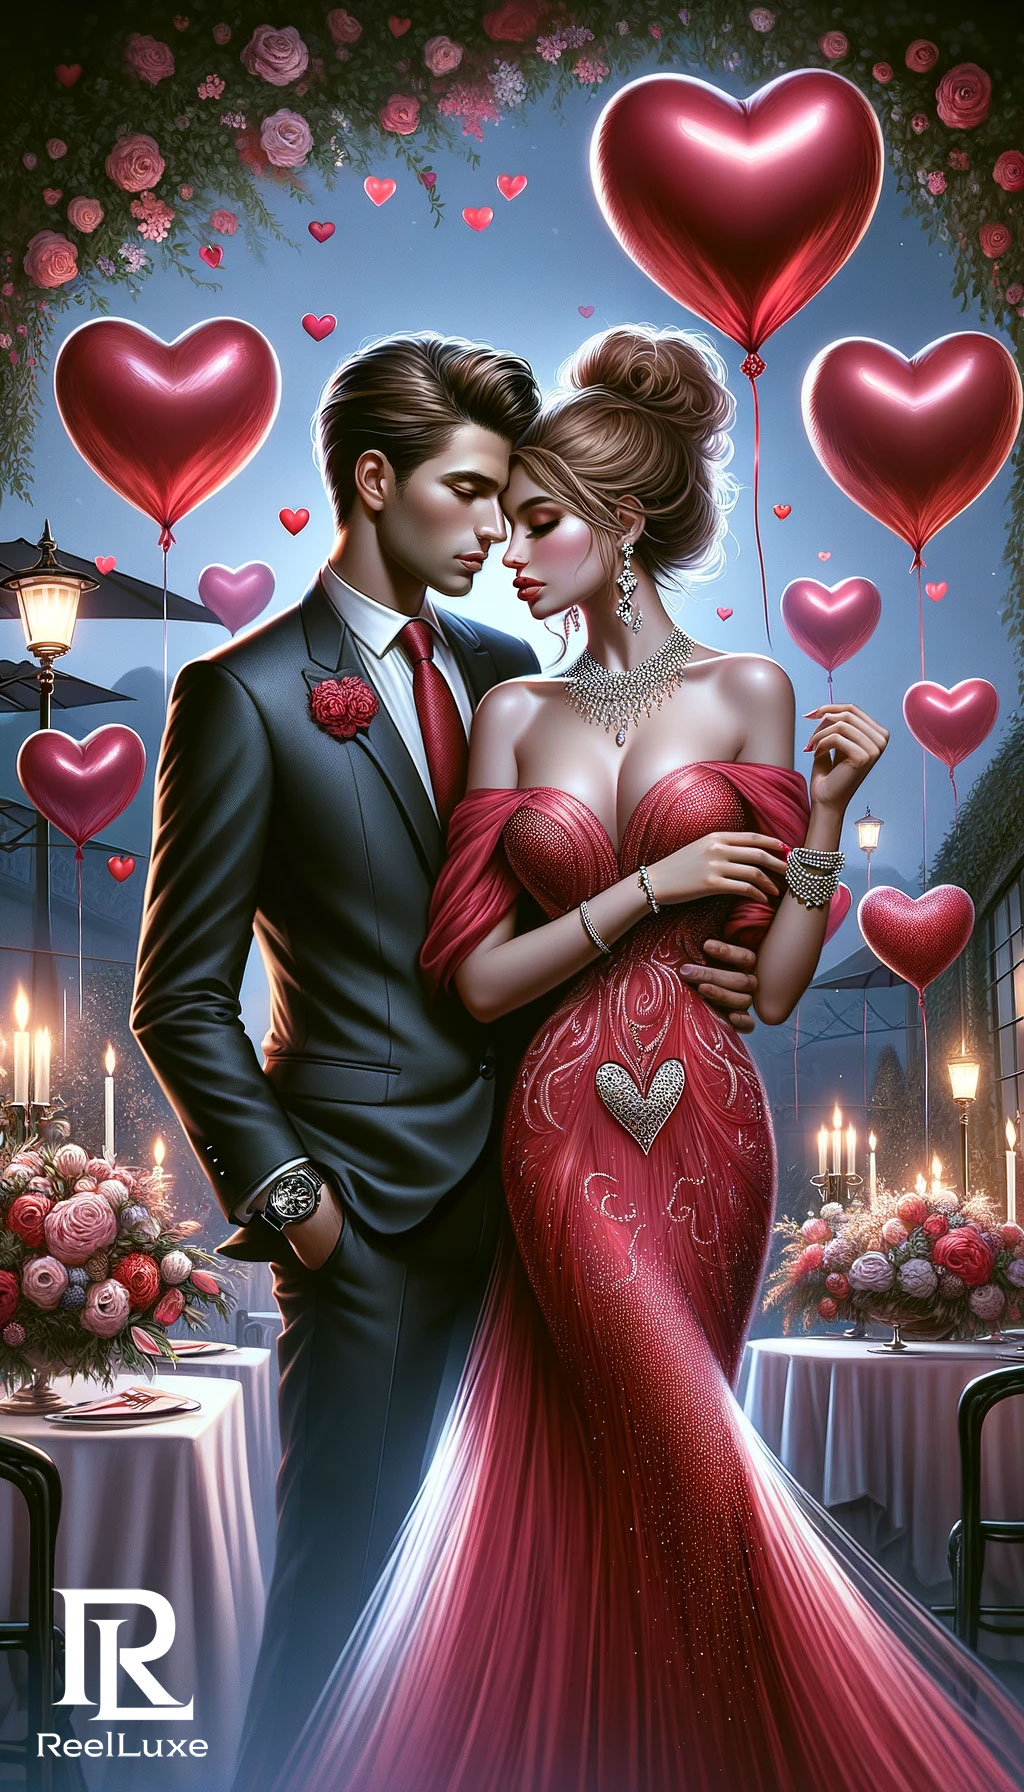 Romance in the Air - Valentine's Day - Beauty and Fashion - Dinner Date - 3